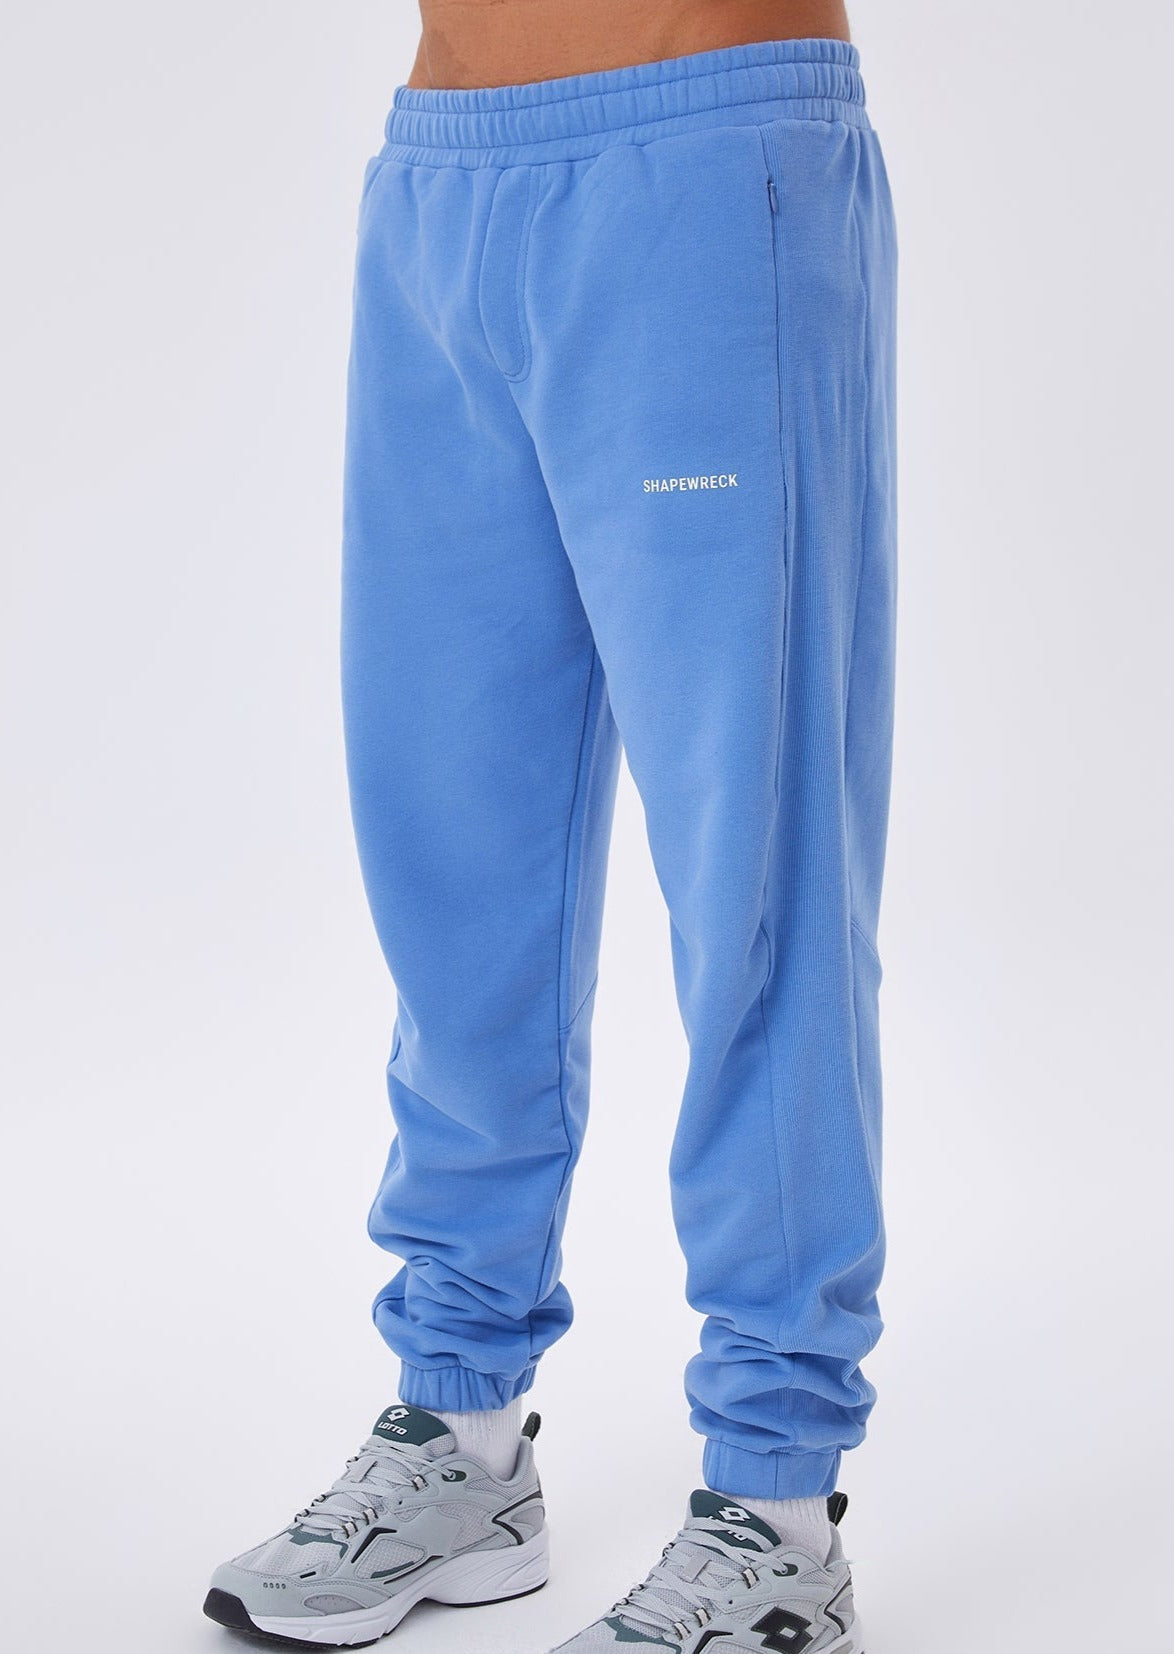 RELAXED FIT Sweatpant PRIMARY JOGGER - PERSIAN BLUE